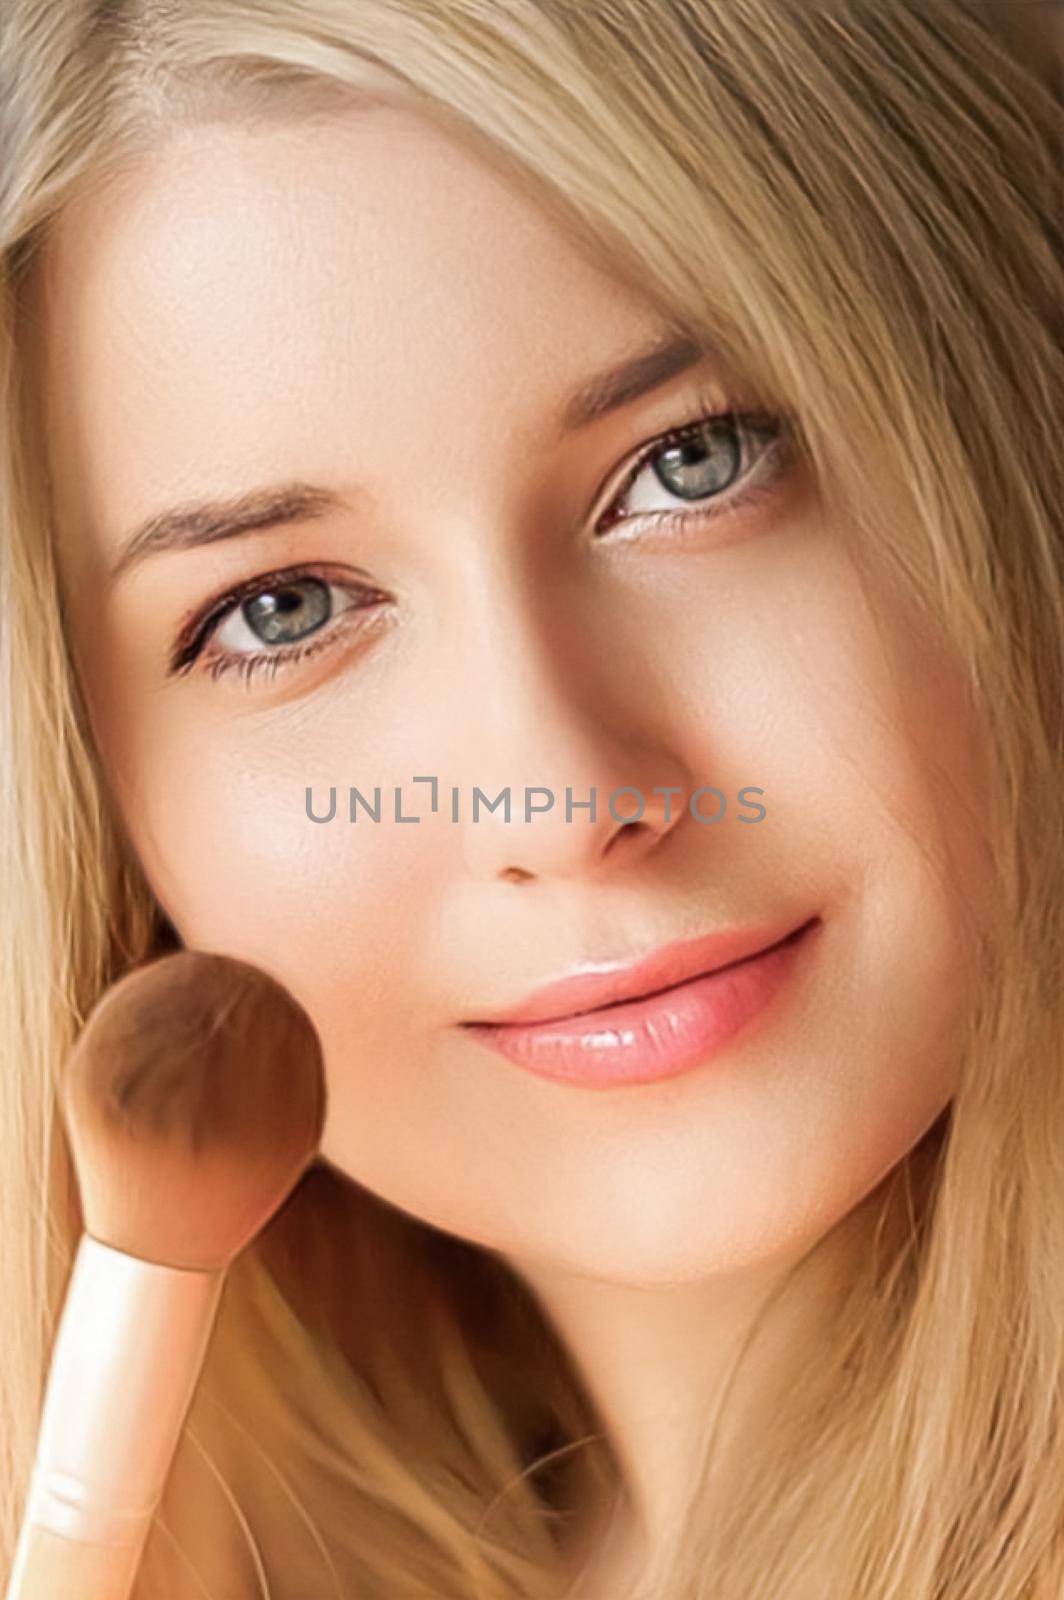 Make-up cosmetics and beauty product, beautiful woman applying cosmetic powder with organic bamboo makeup brush, face portrait close-up